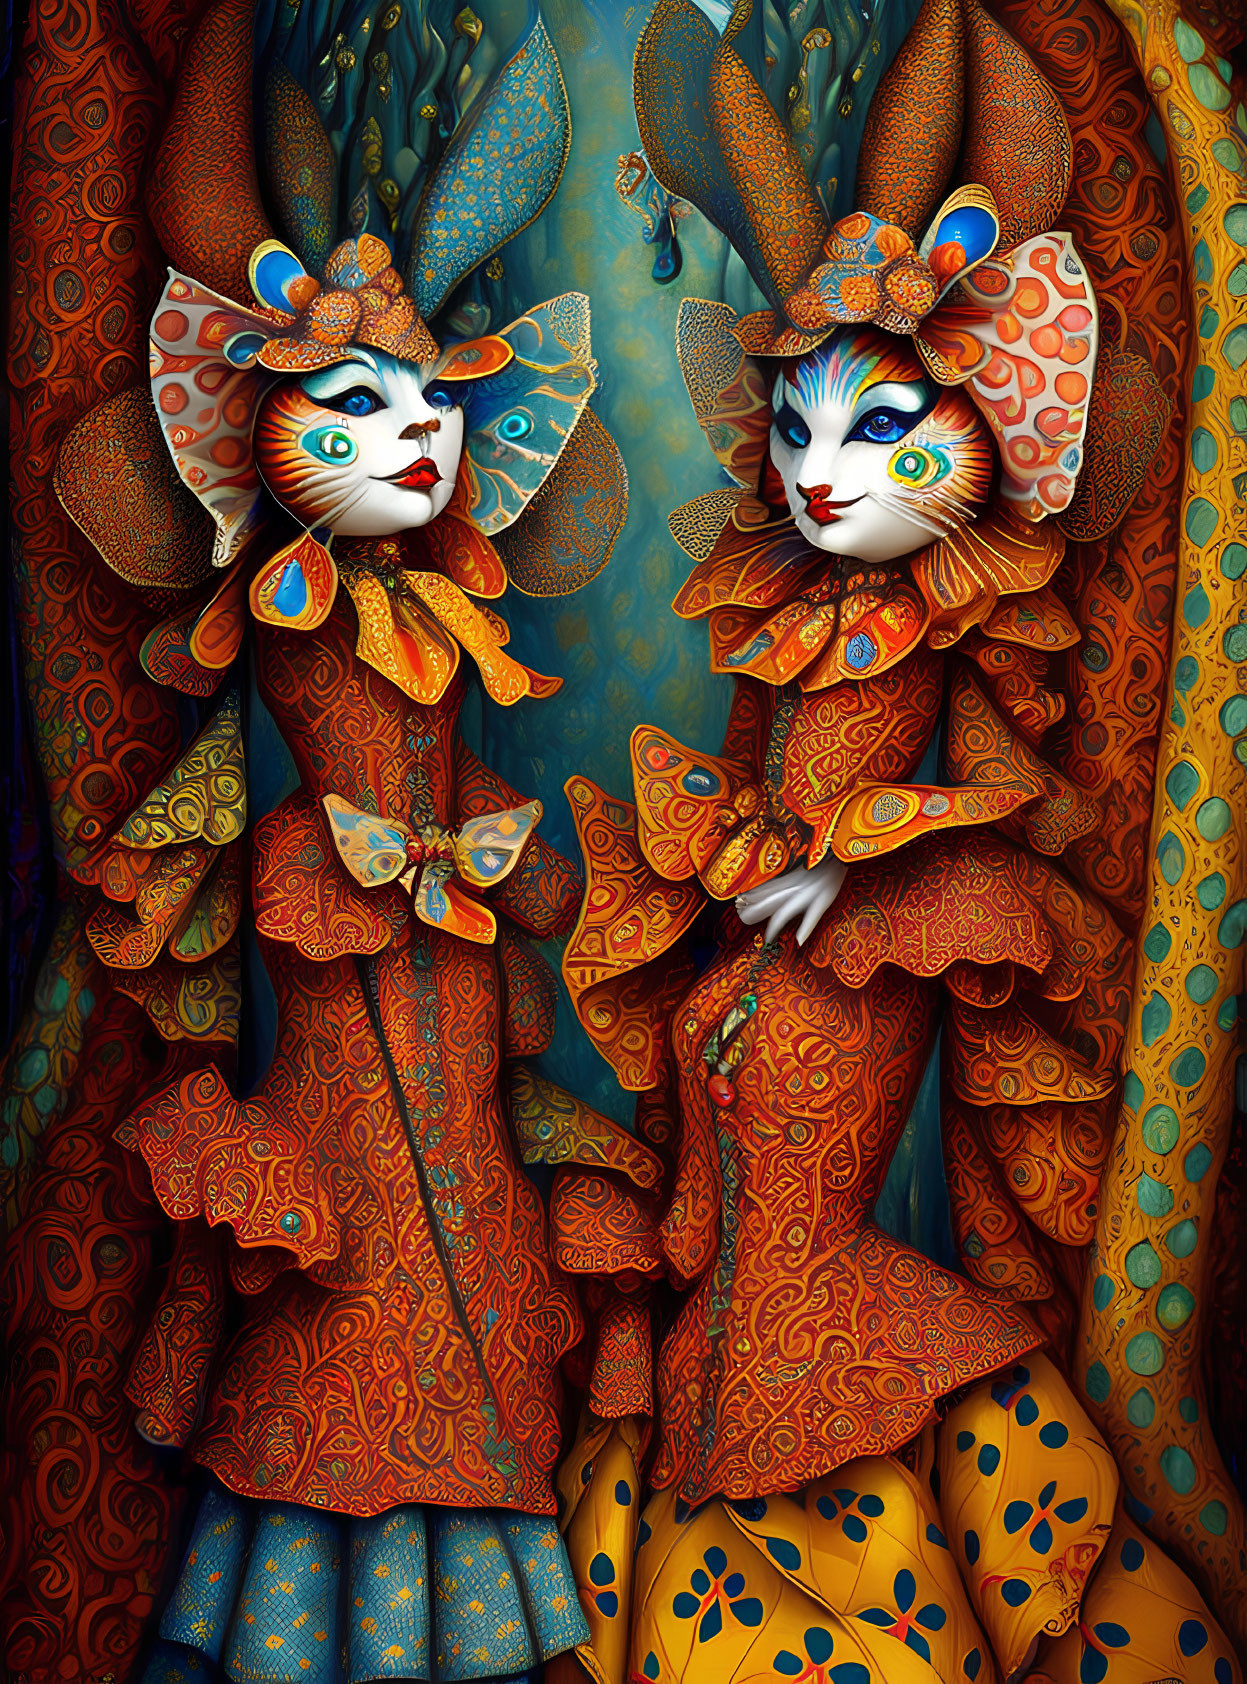 Stylized feline figures in orange and blue costumes with butterfly motifs